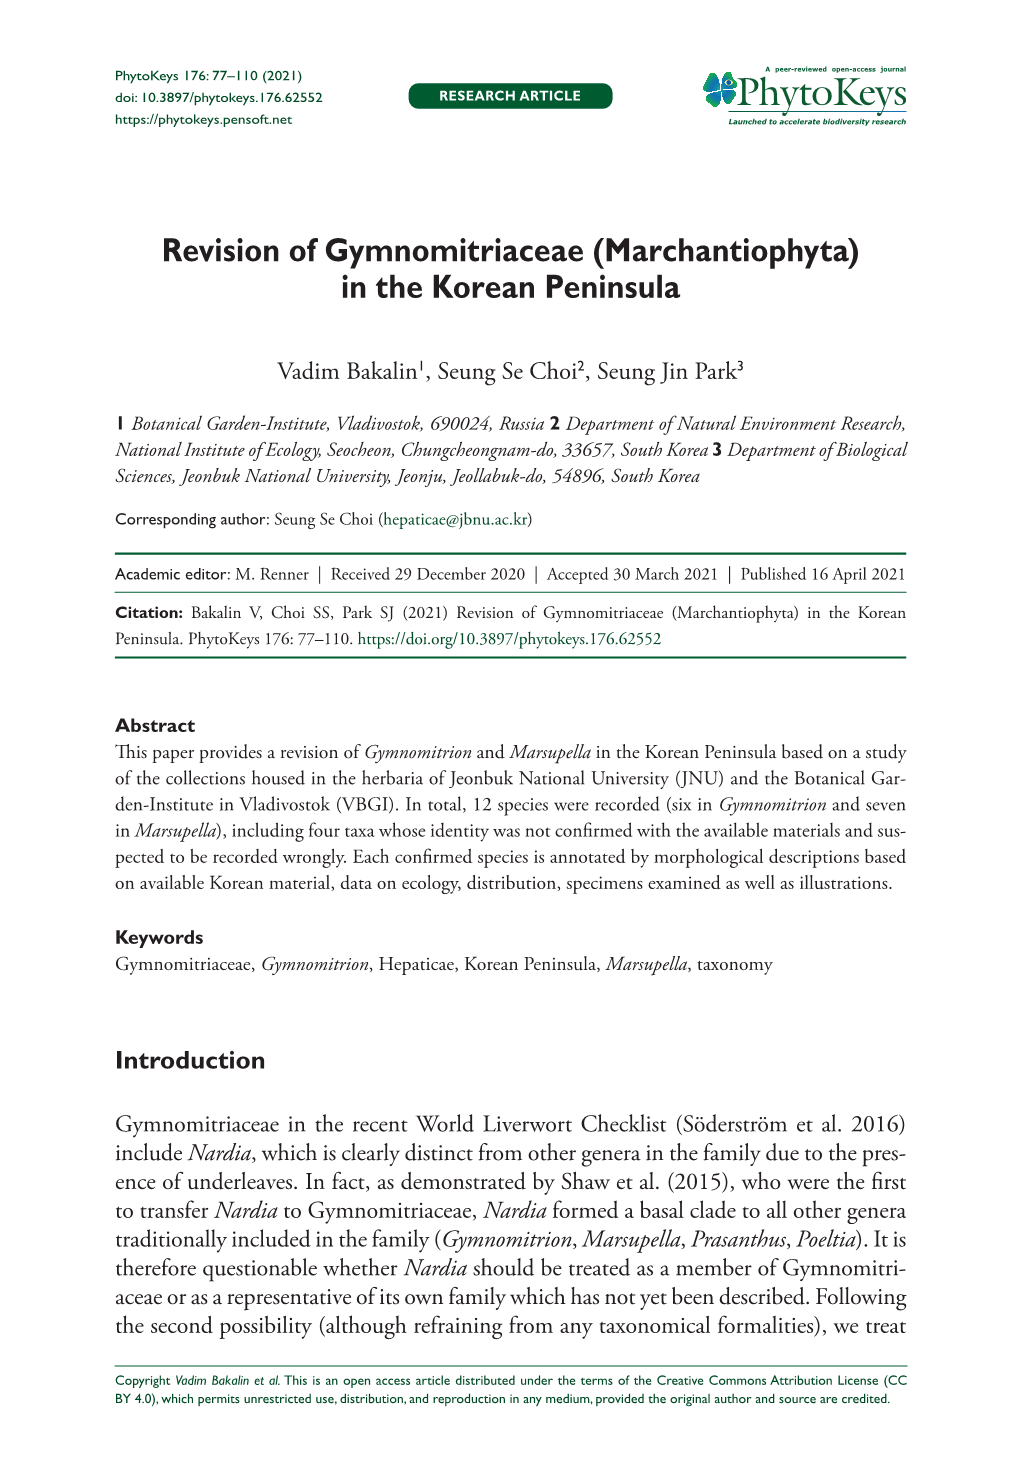 ﻿Revision of Gymnomitriaceae (Marchantiophyta) in The